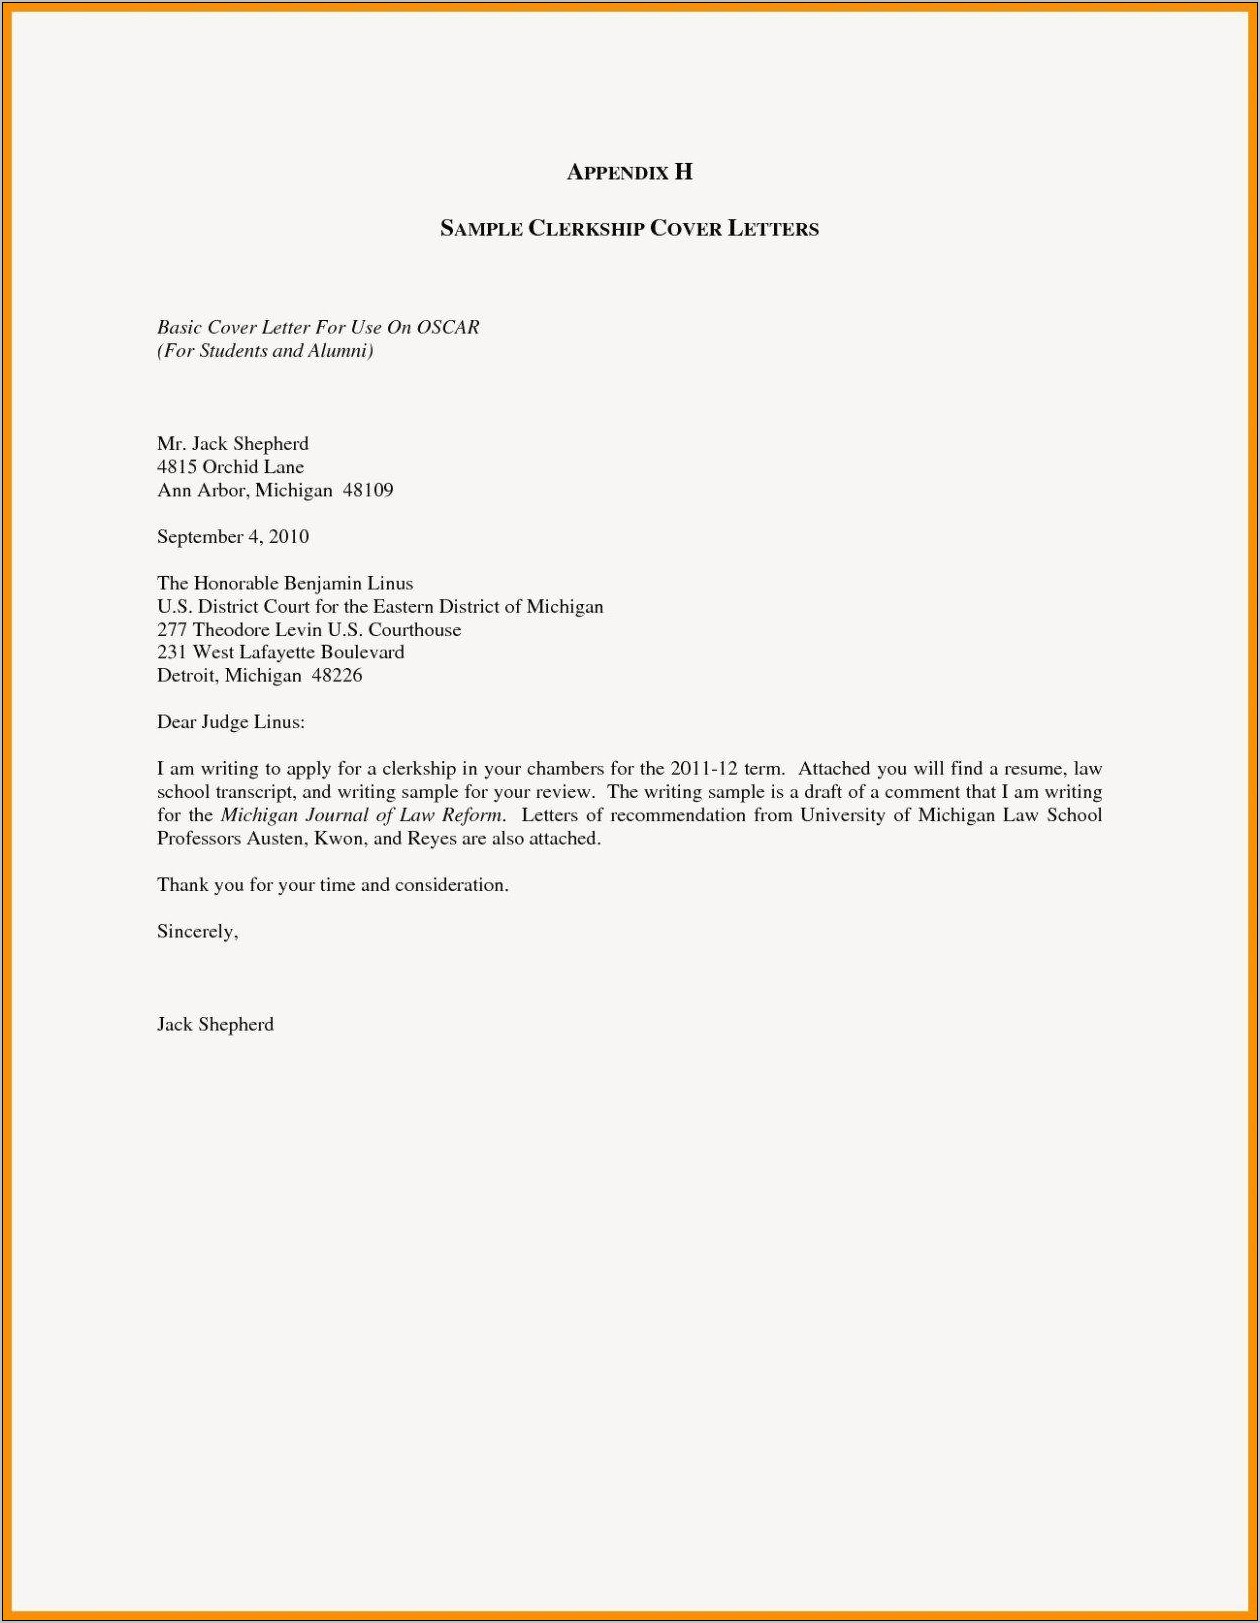 For Your Consideration Resume Cover Letter